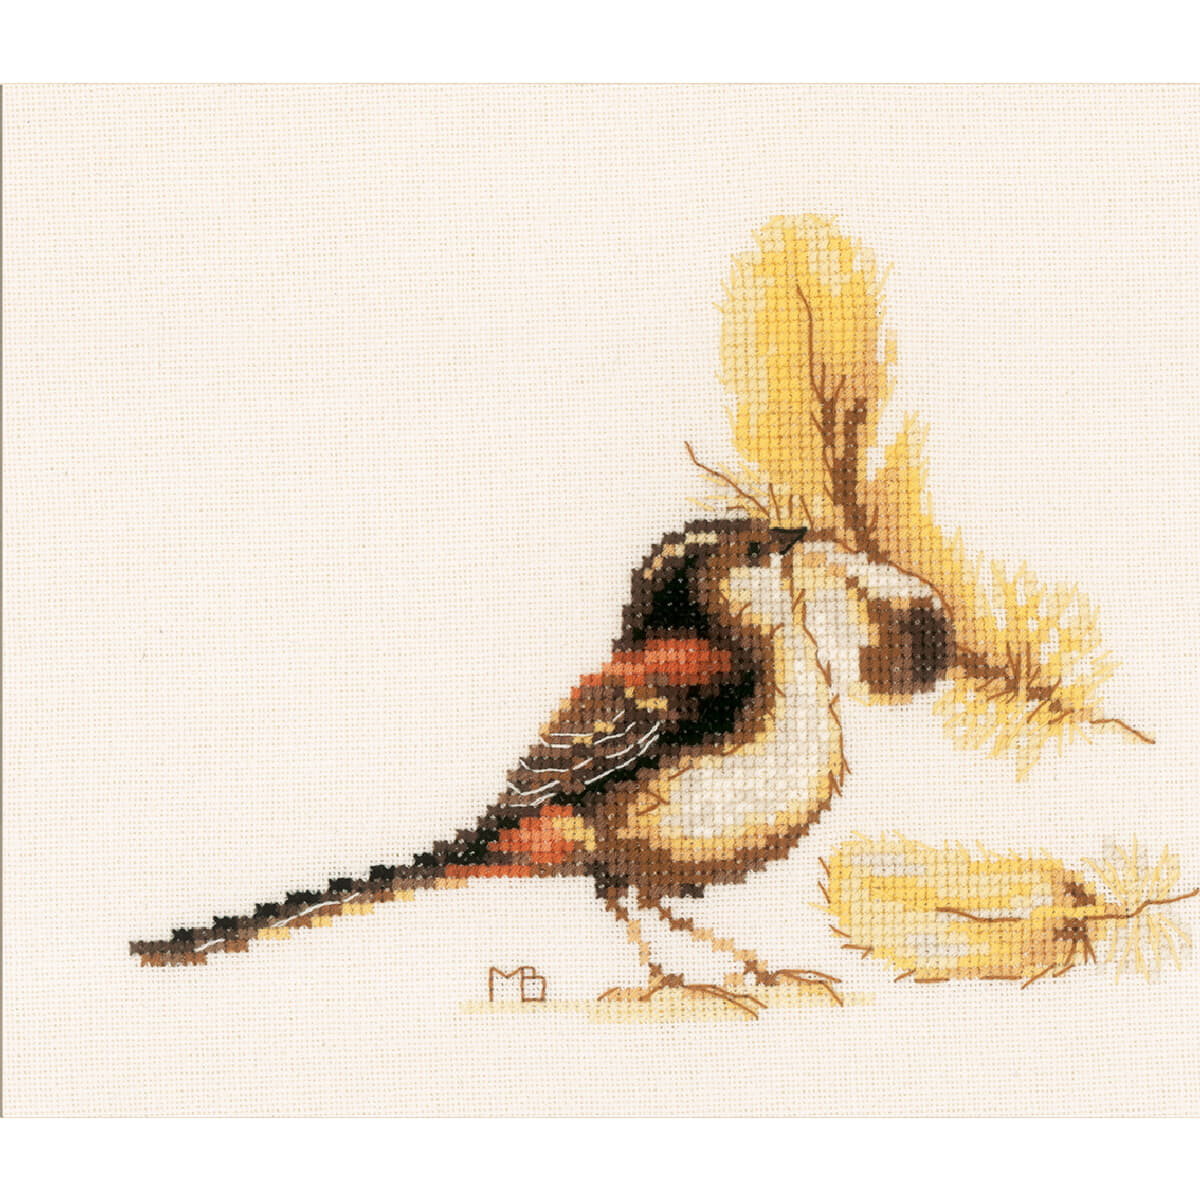 A cross-stitch embroidery of a bird with brown, black and...